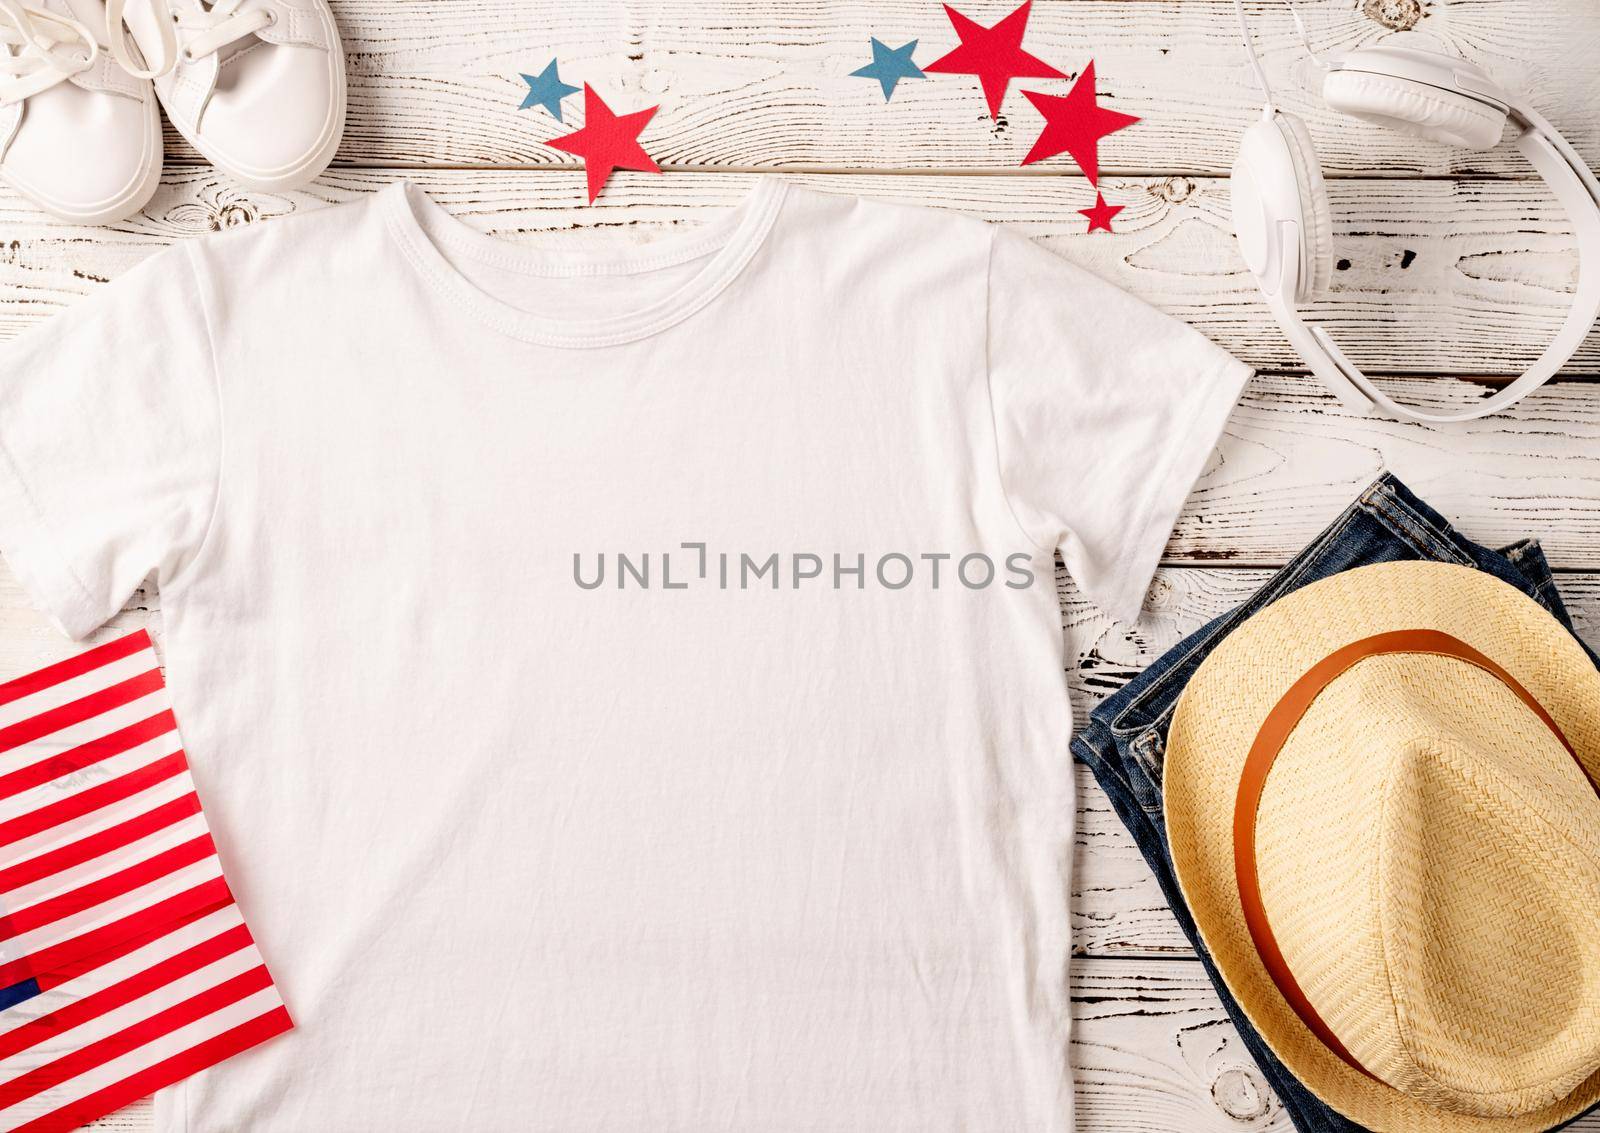 Mockup design white t shirt for logo, top view on white wooden background with US flag and decoration by Desperada